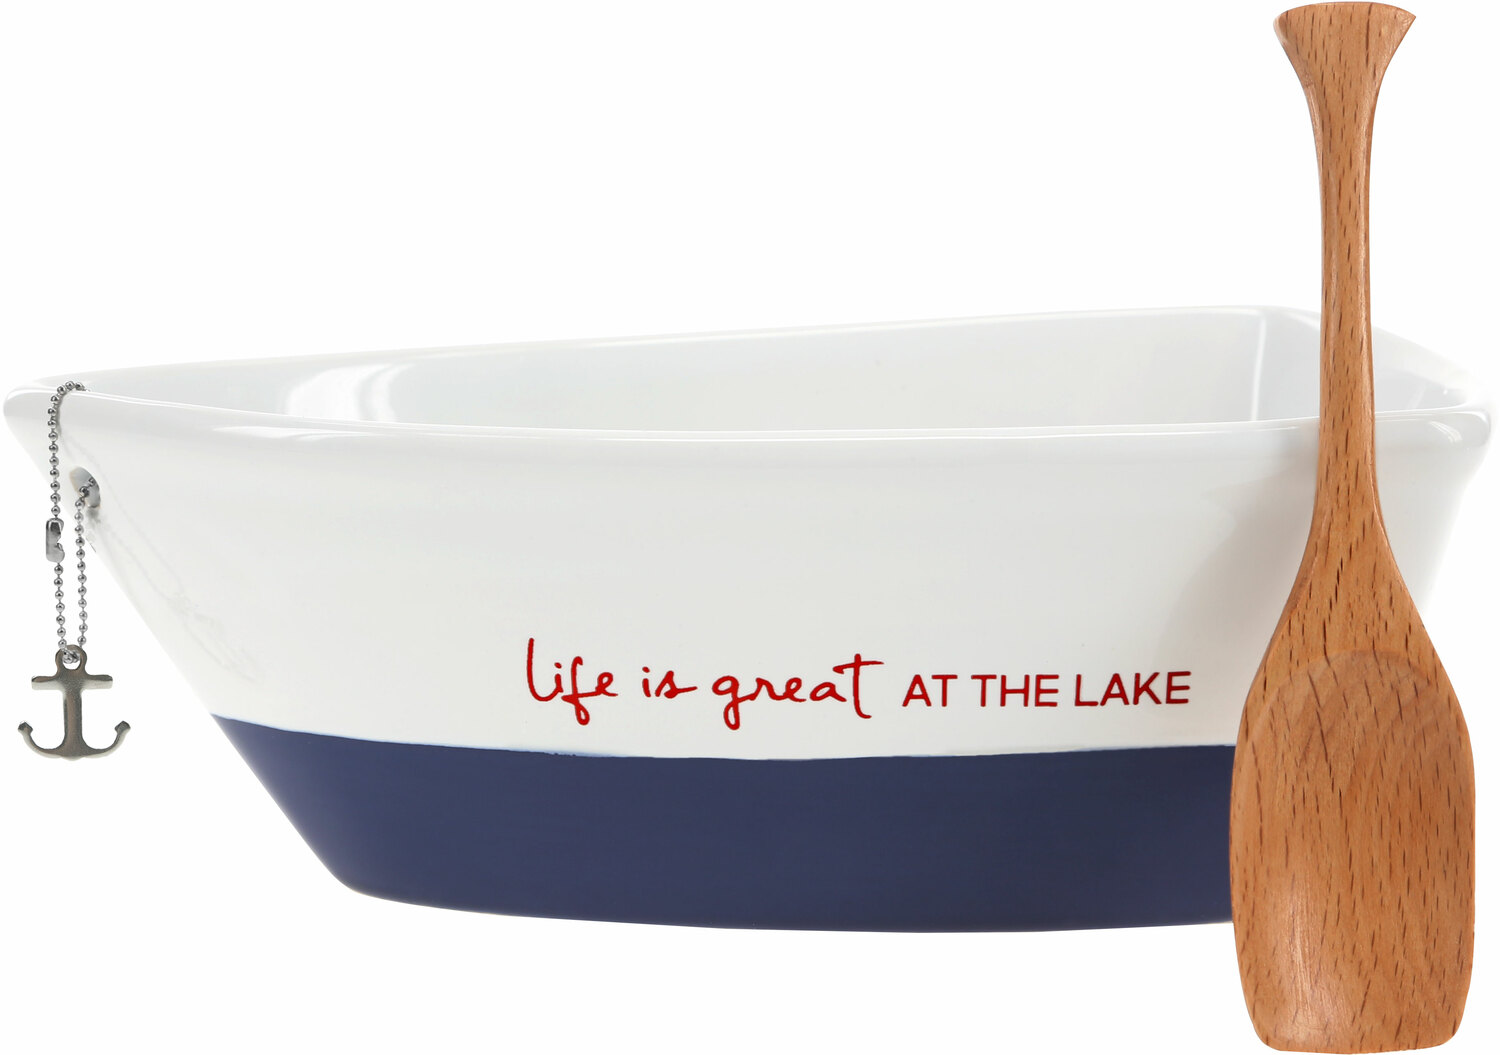 At the Lake by We People - At the Lake - 7" Boat Serving Dish with Oar